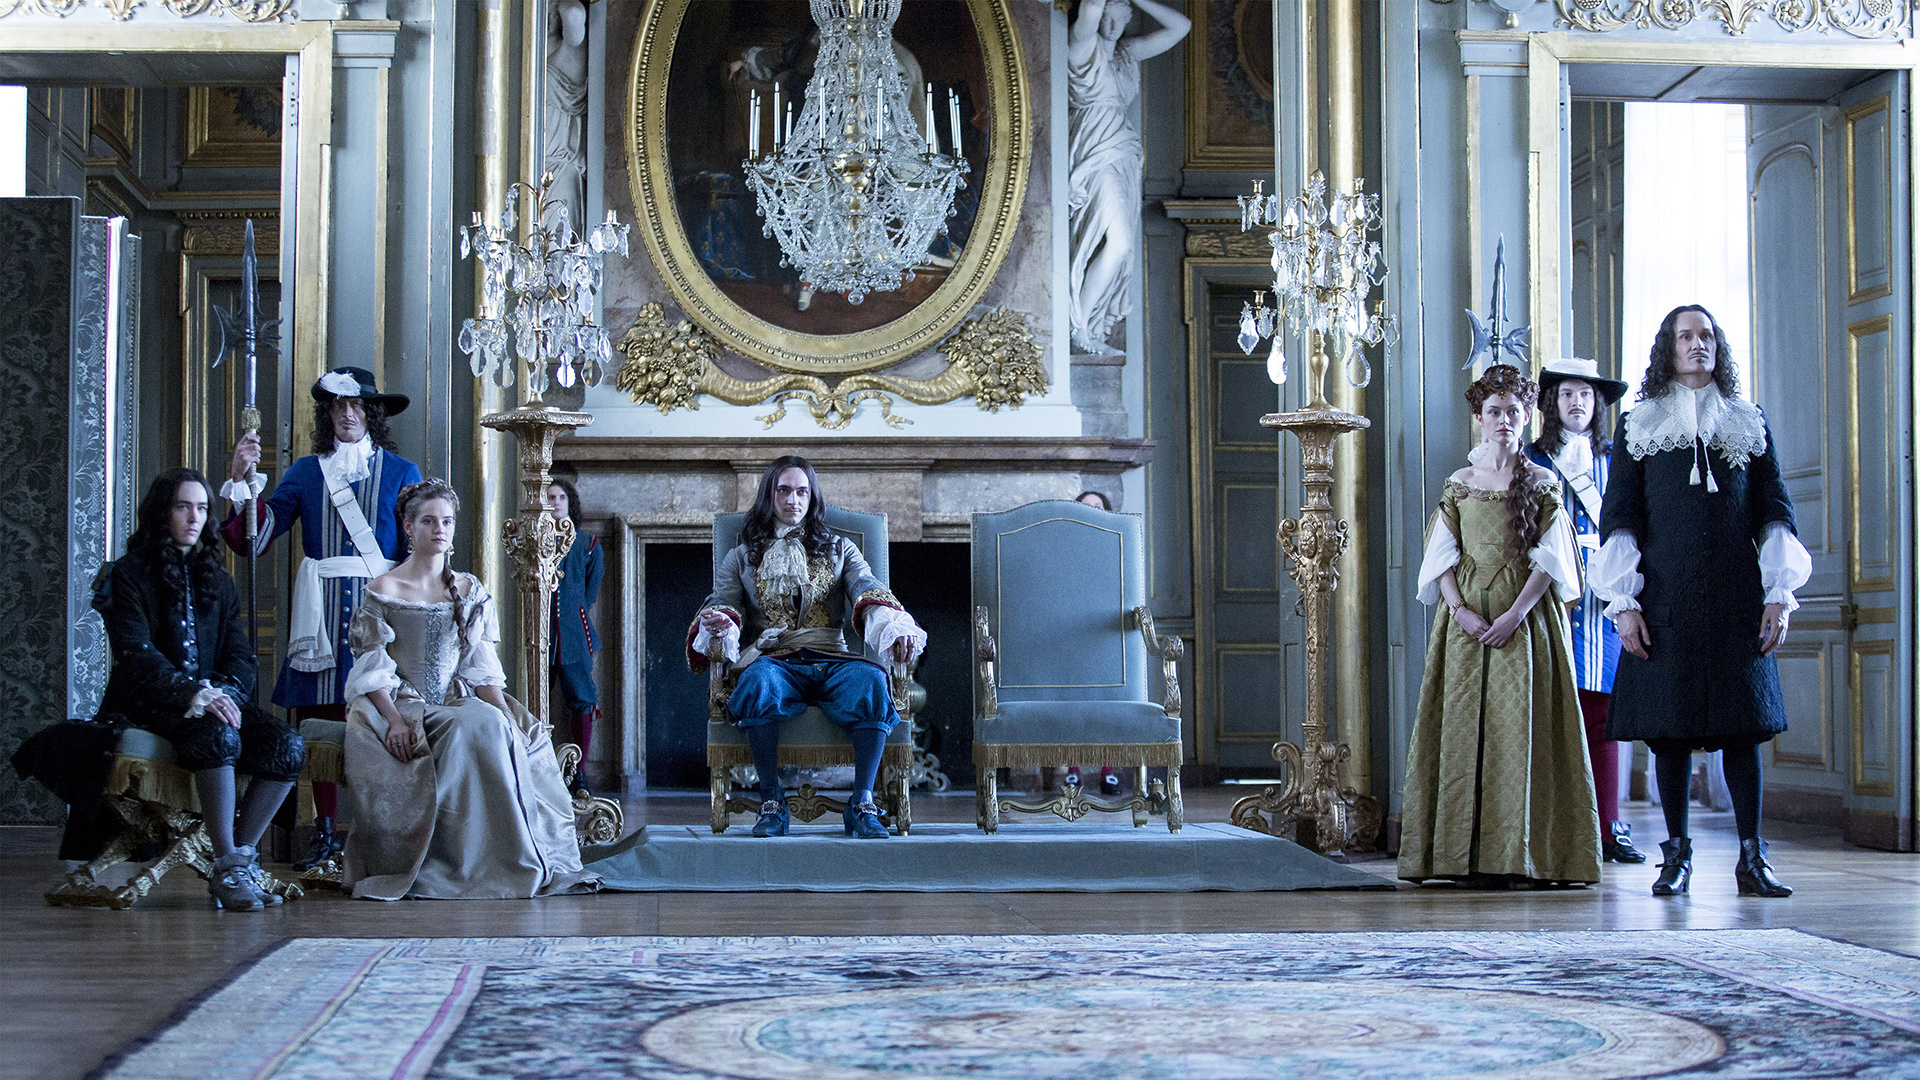 Versailles, King Louie XIV, Ovations, Along comes Mary, 1920x1080 Full HD Desktop